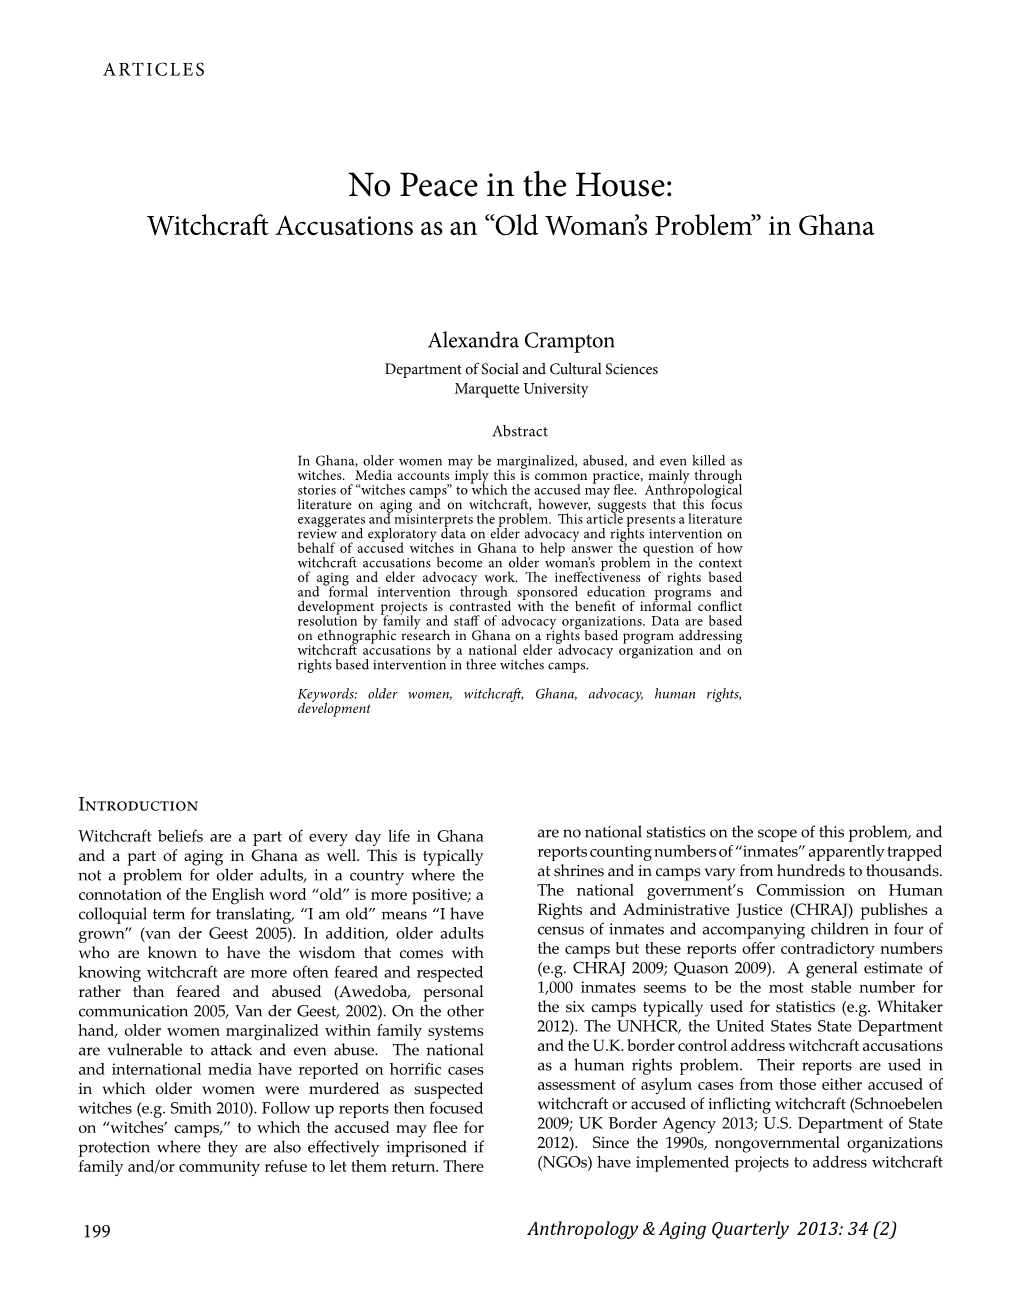 No Peace in the House: Witchcraft Accusations As an “Old Woman’S Problem” in Ghana